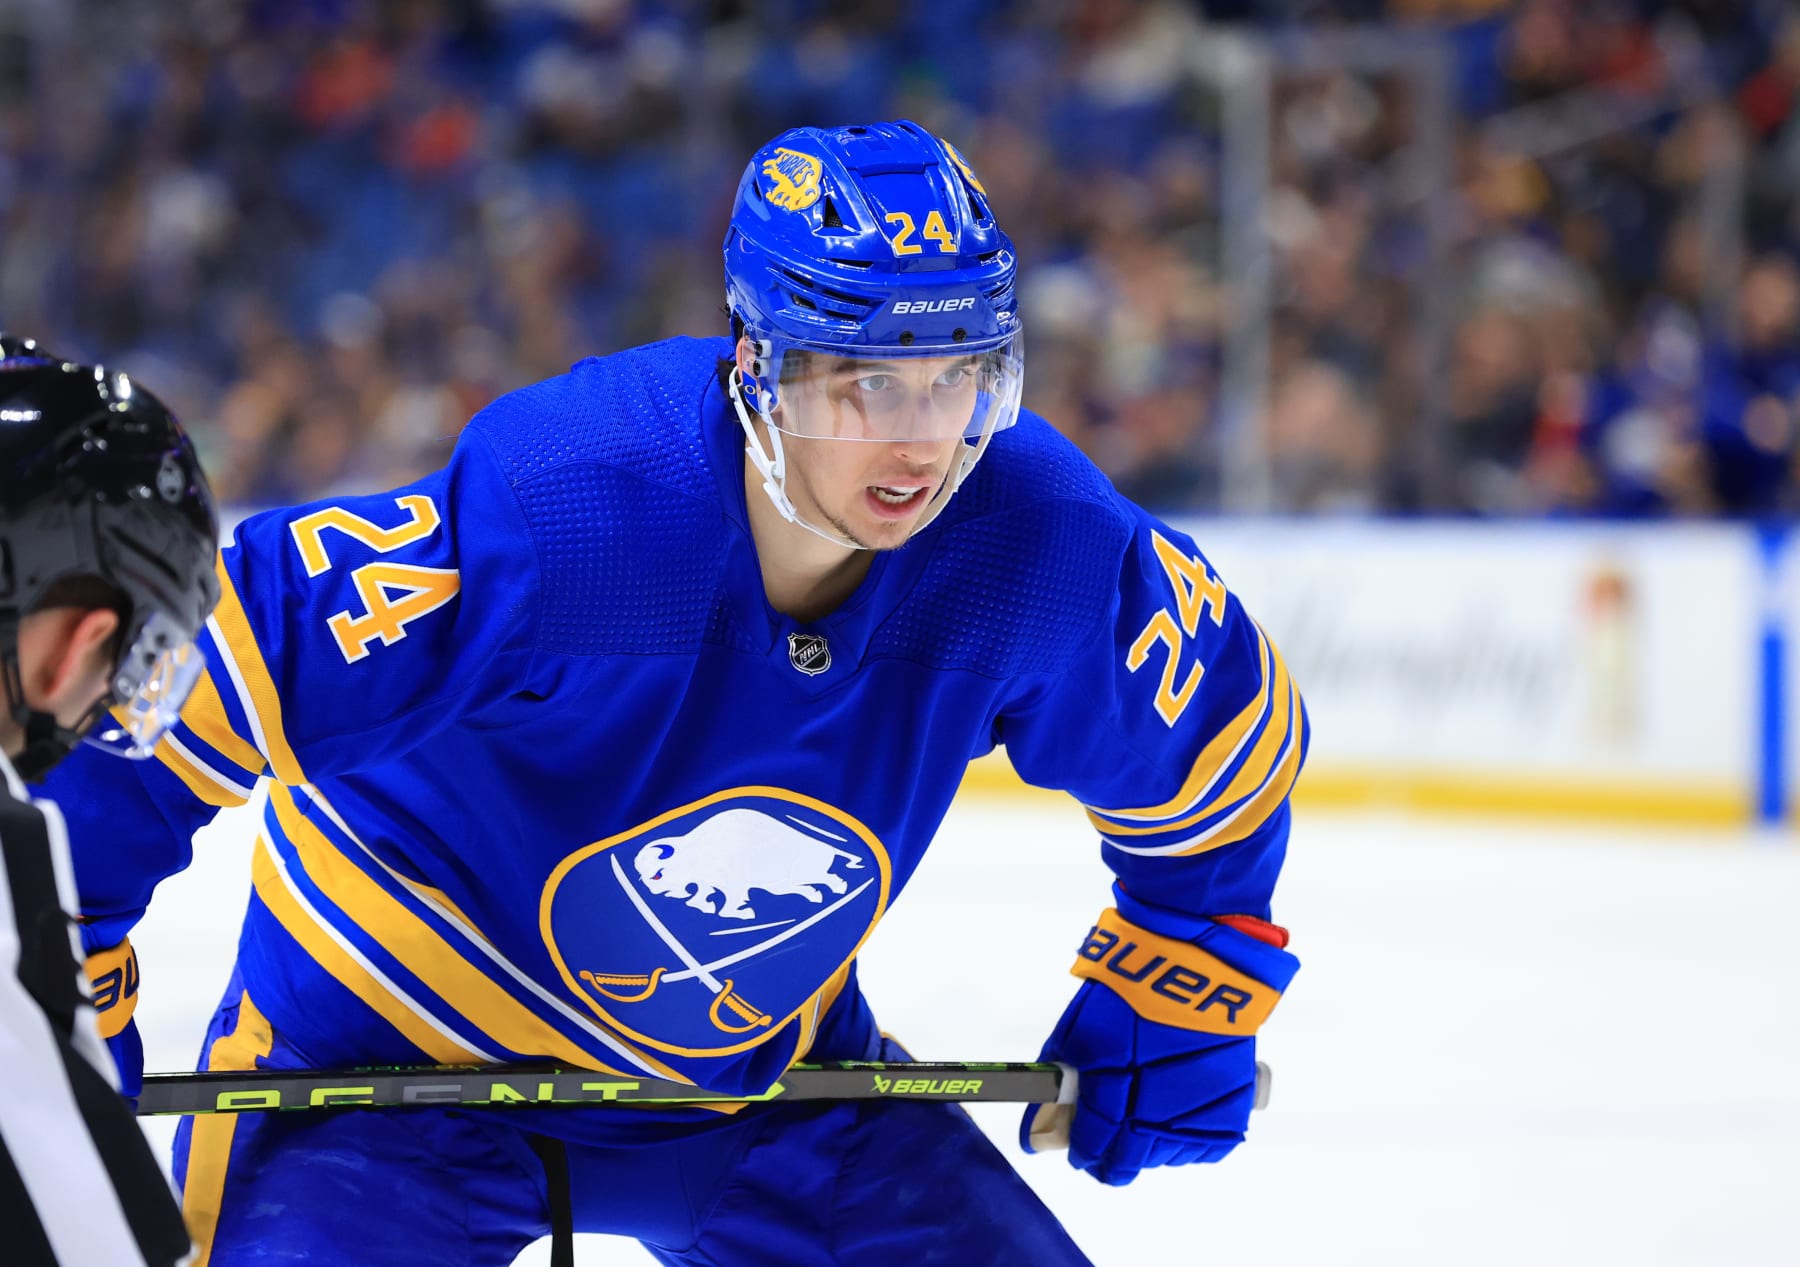 Contracts for top NHL restricted free agents rising - Sports